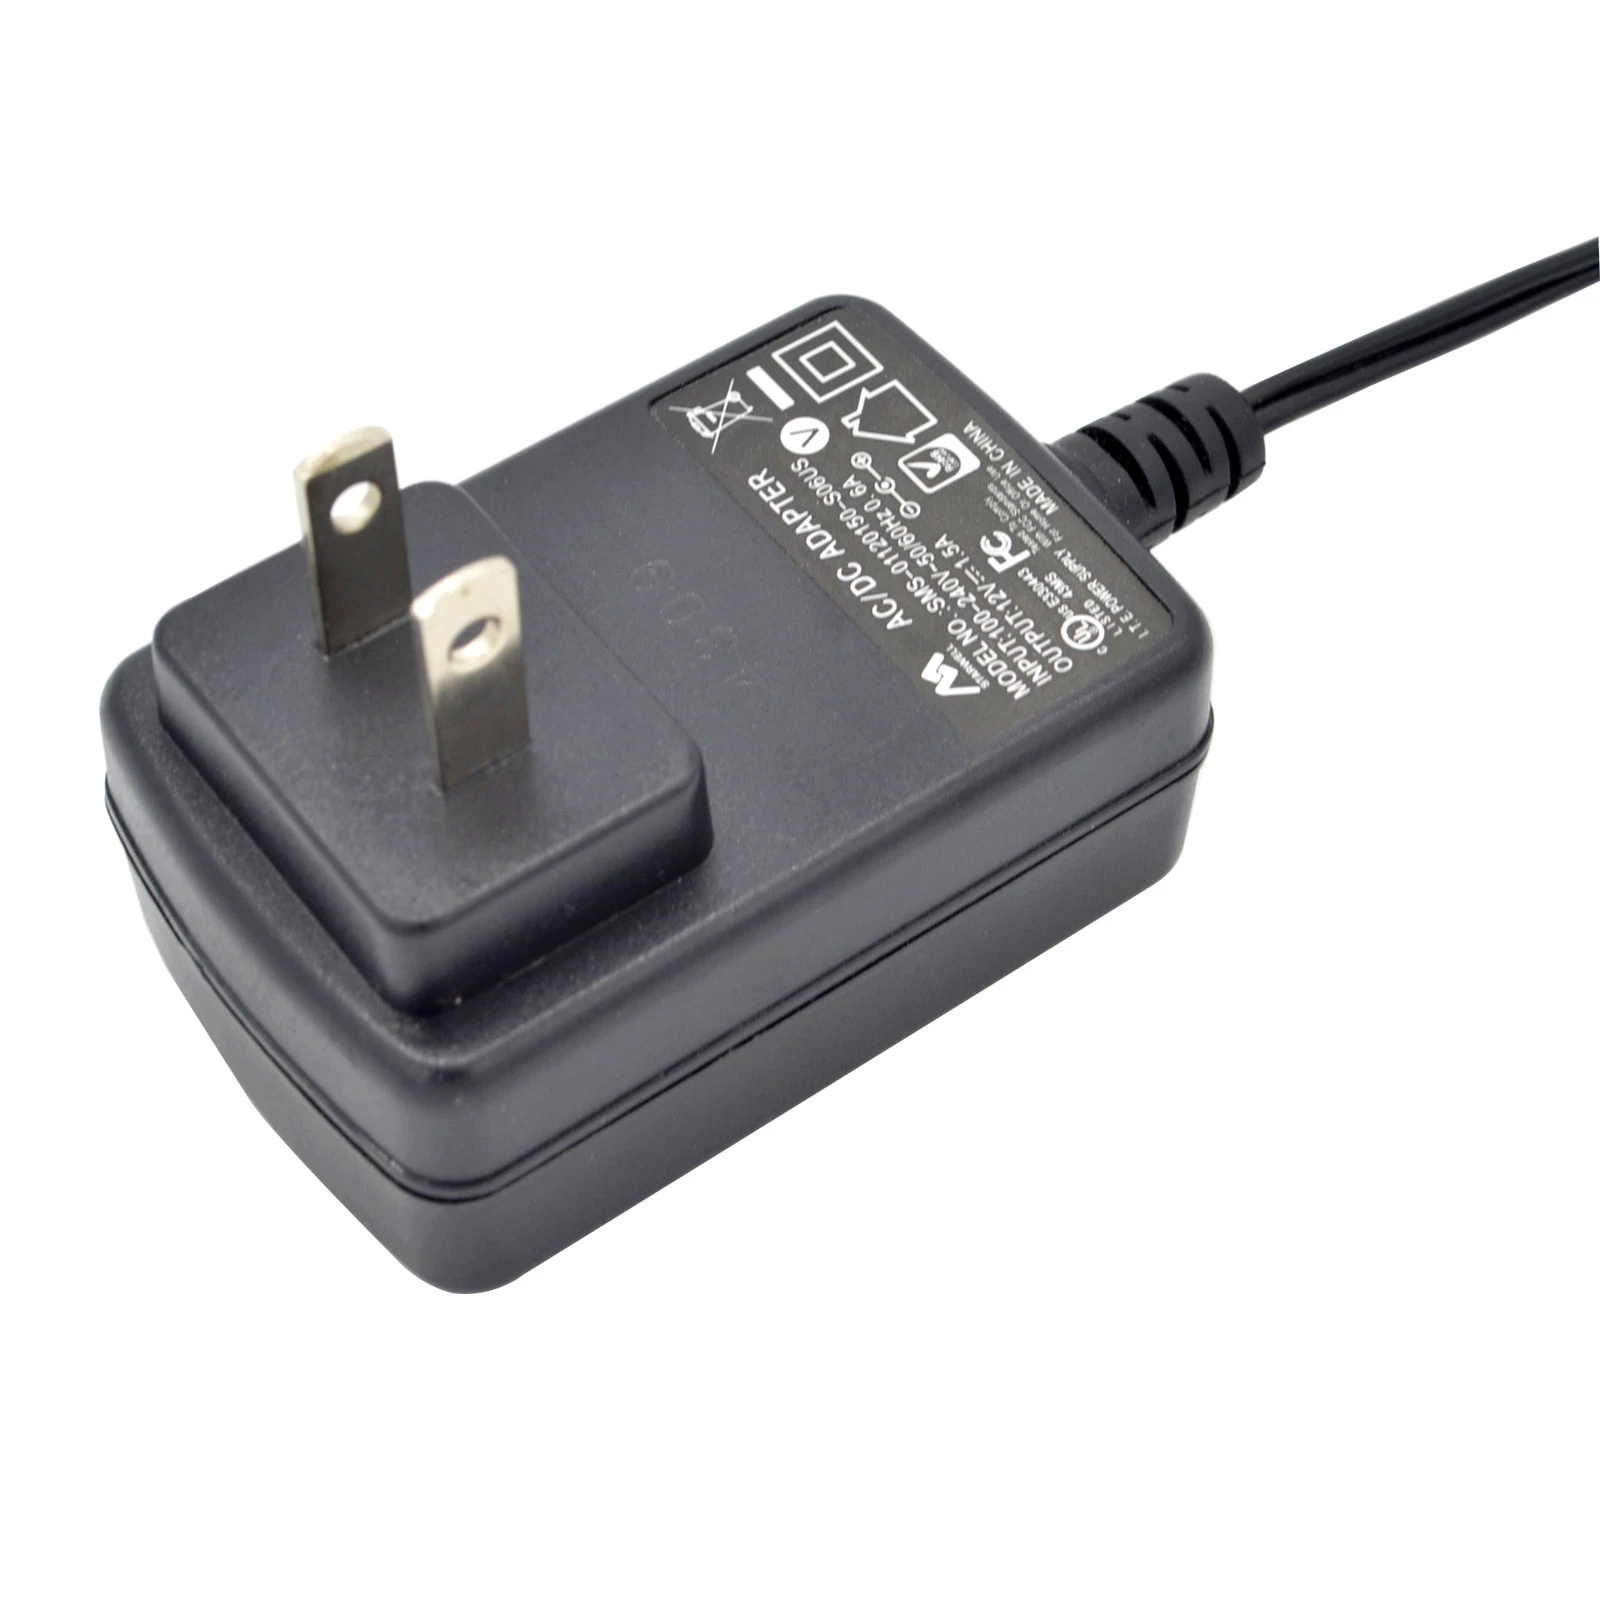 US UL CUL VI Switching dc adaptor 5v 9v 12v 24v 0.5a 1a 1.5a 2a output power supply